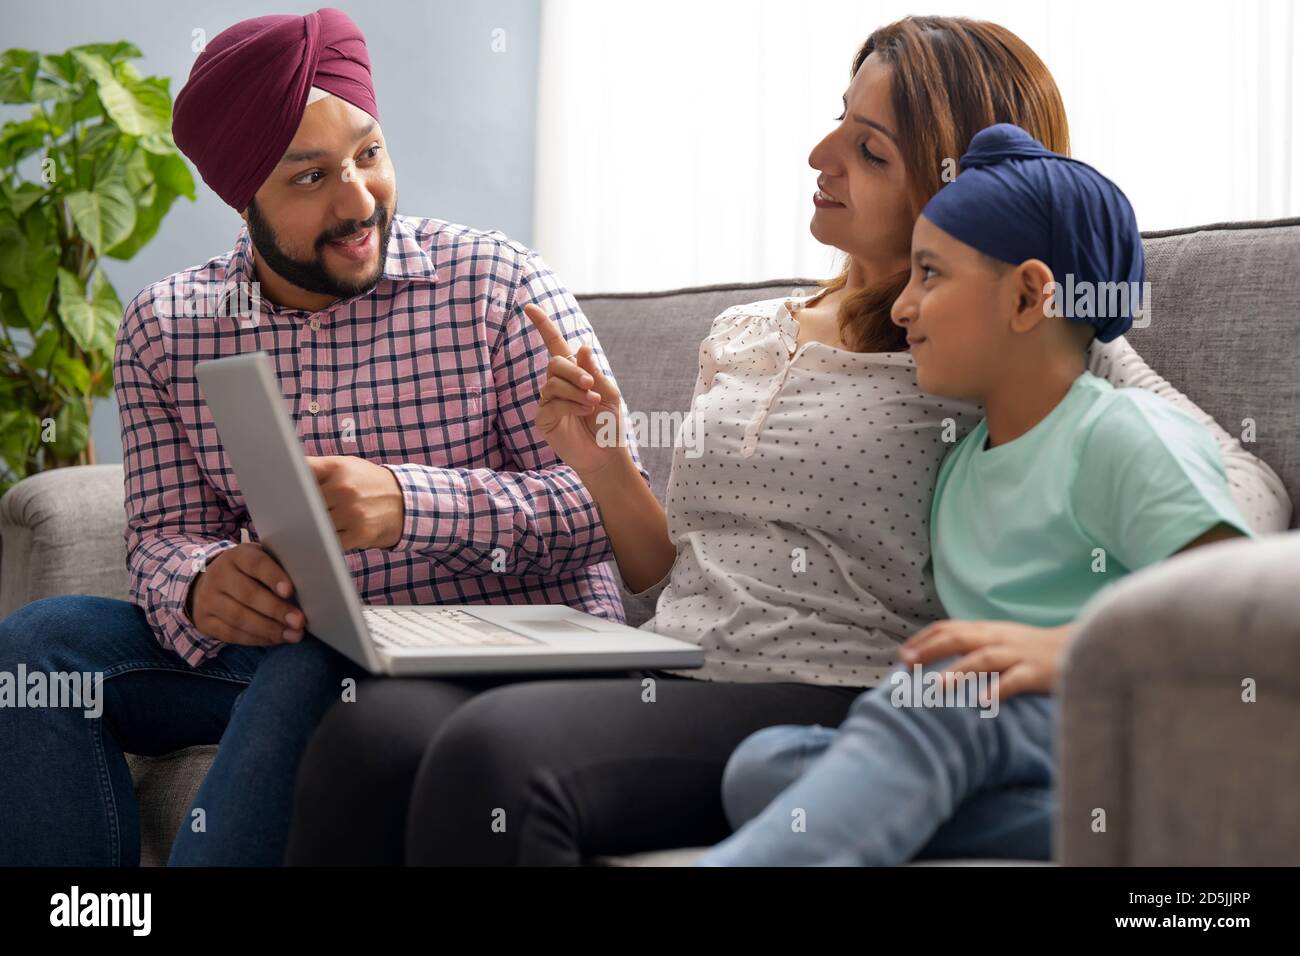 A SIKH PARENTS LOOKING AT EACH OTHER WHILE TEACHING SON WITH LAPTOP Stock Photo